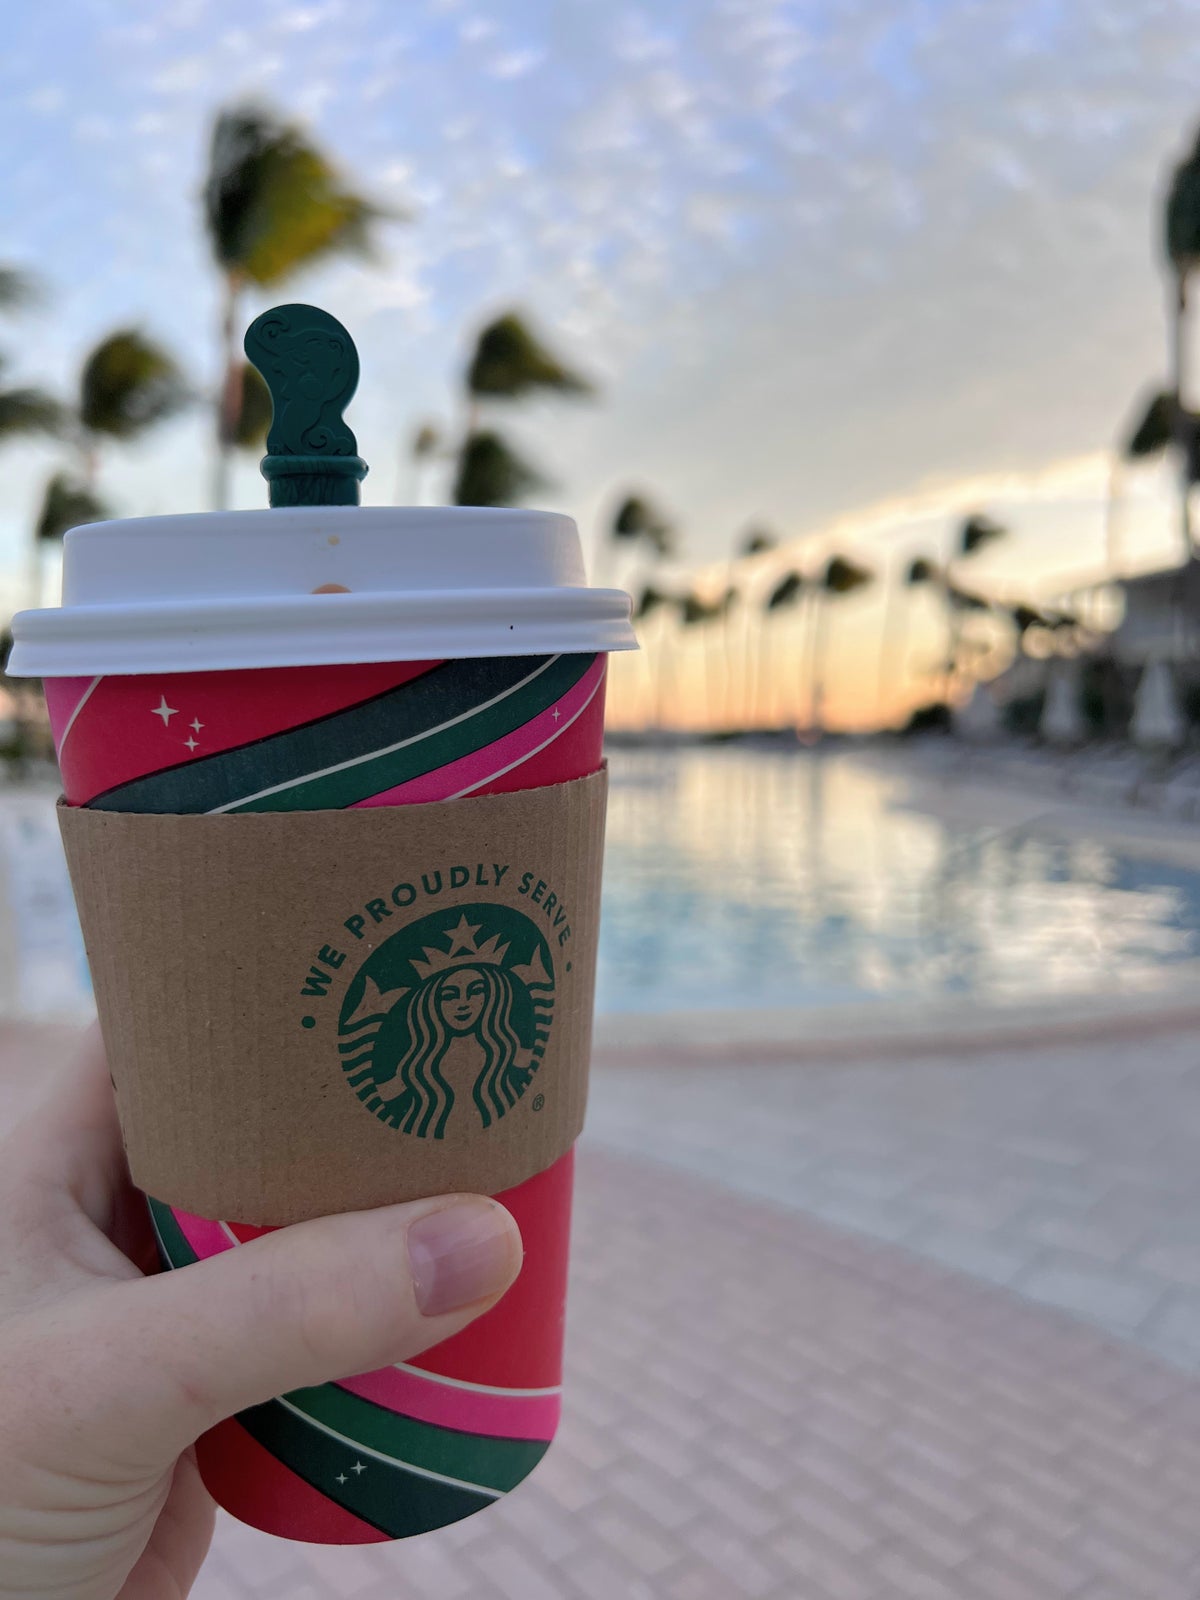 Starbucks coffee in front of the pool